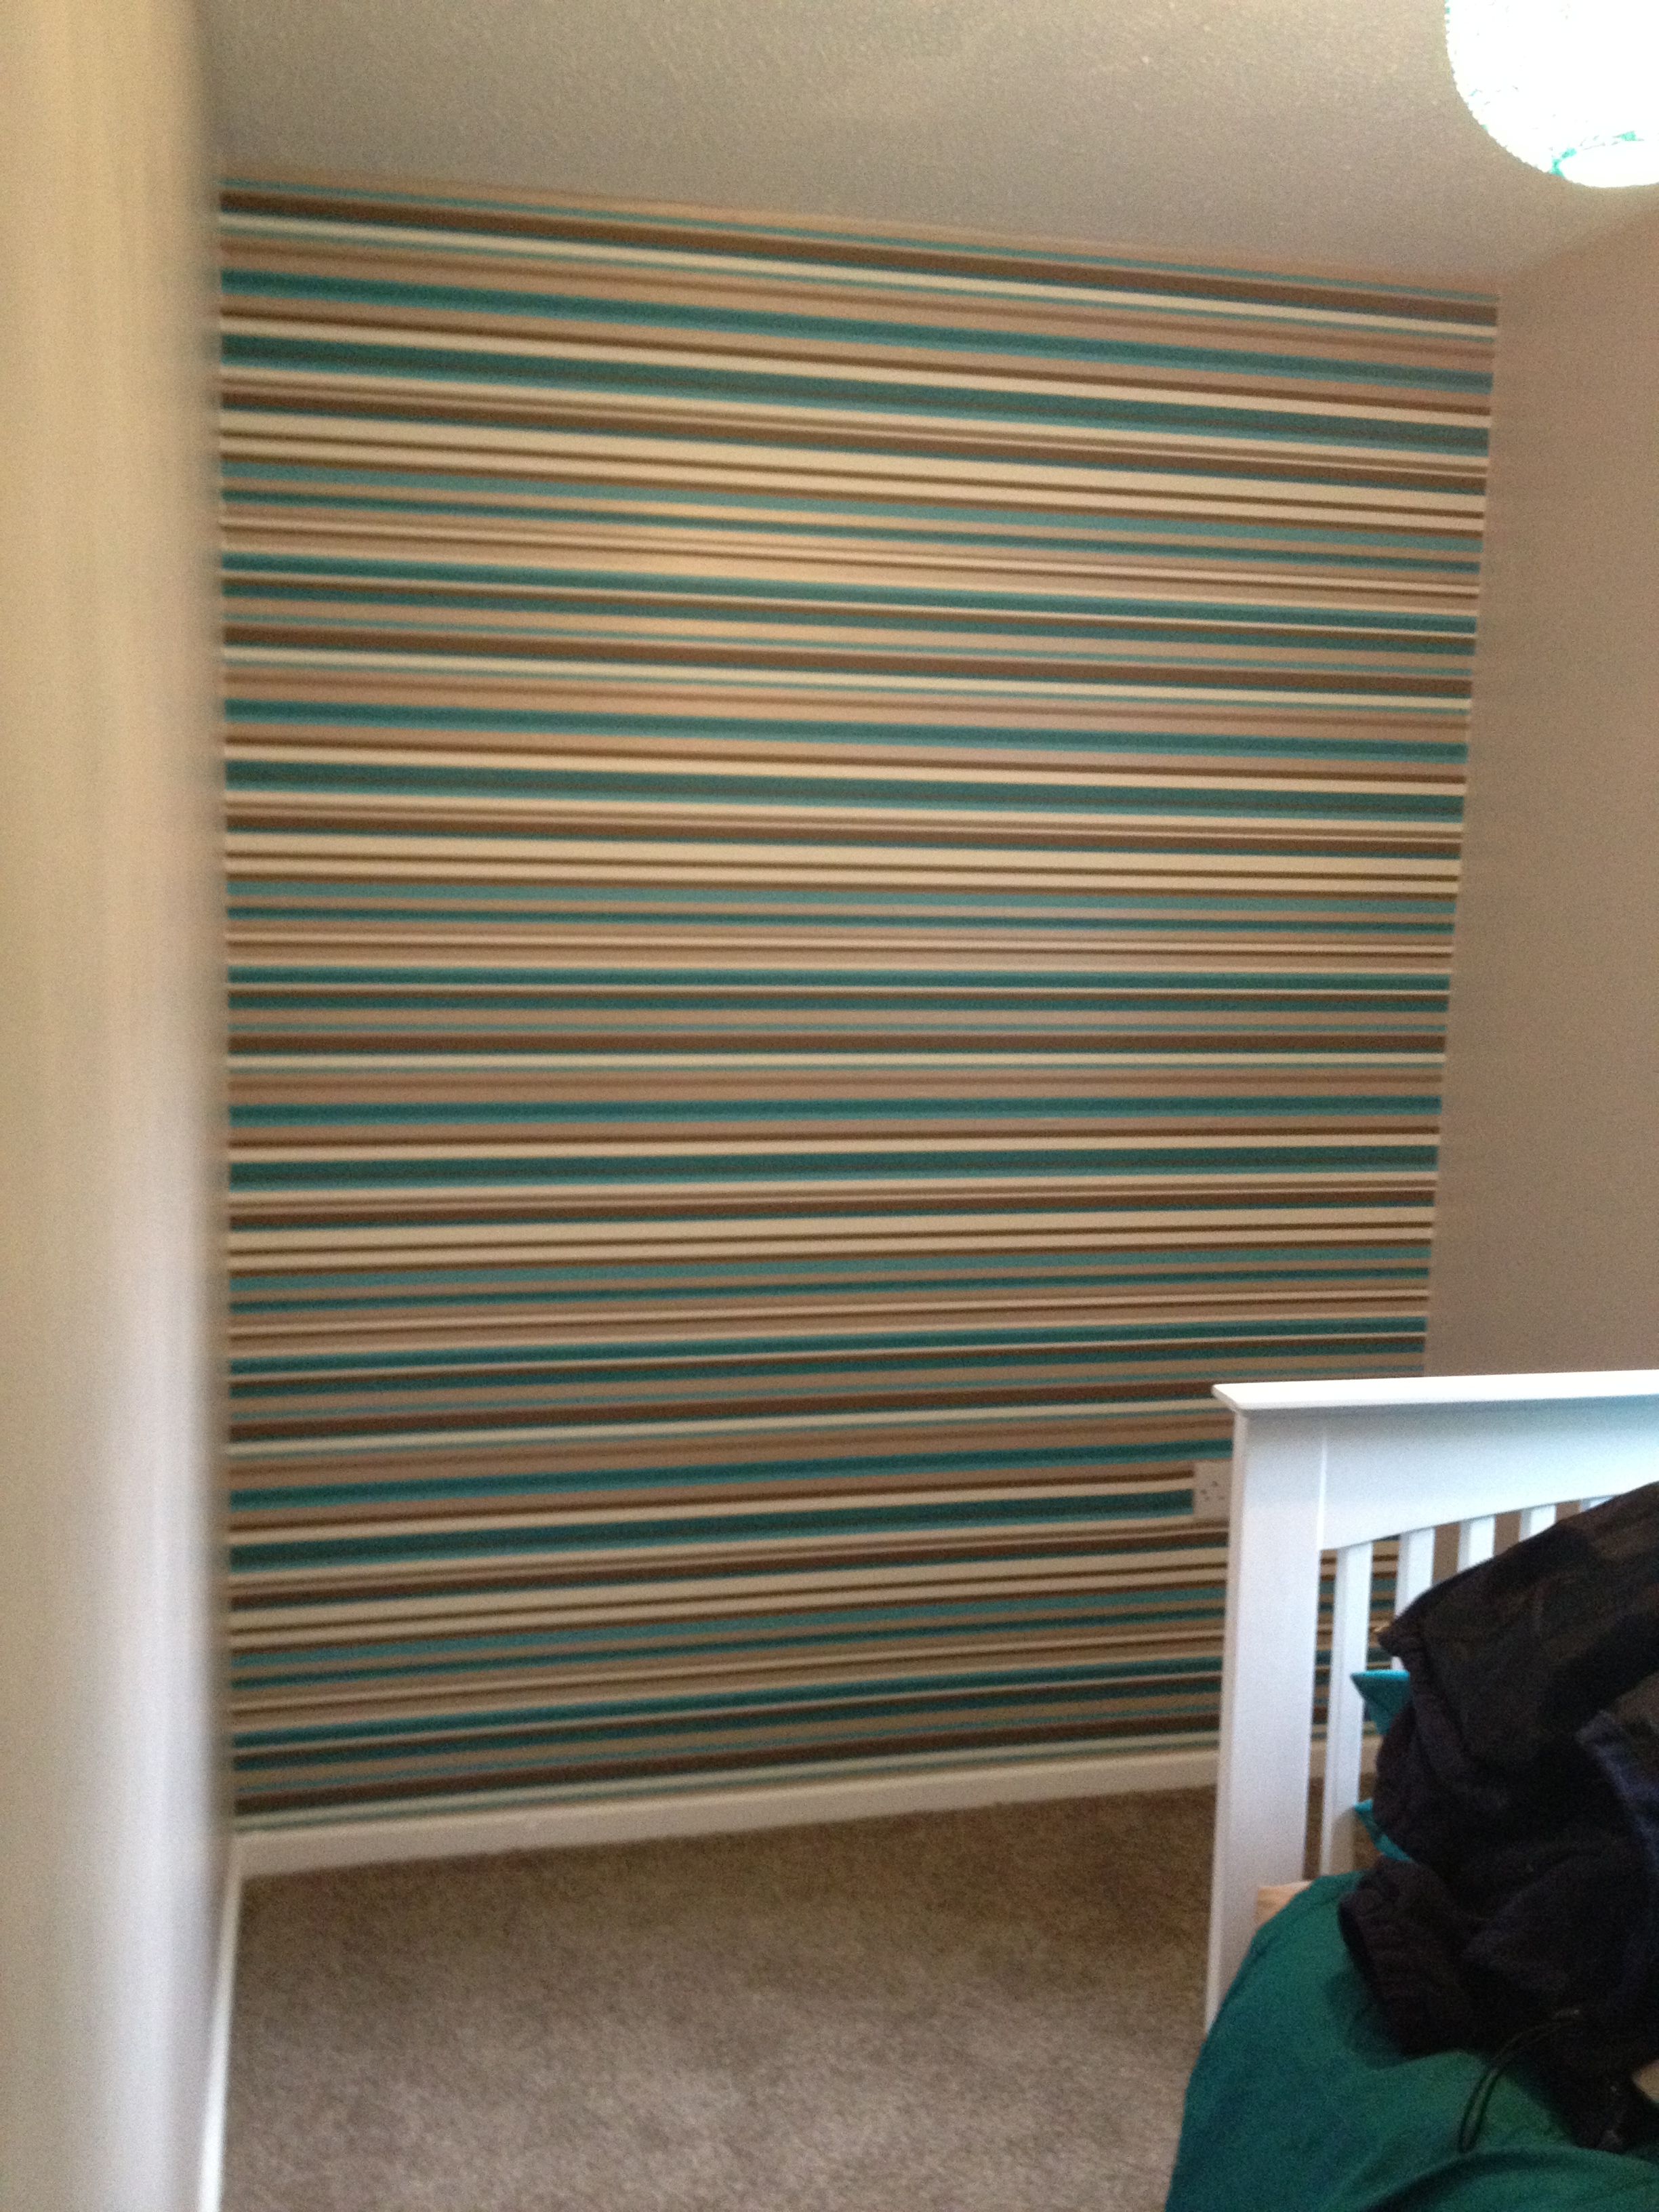 Teal Striped Wallpaper Home Desirable